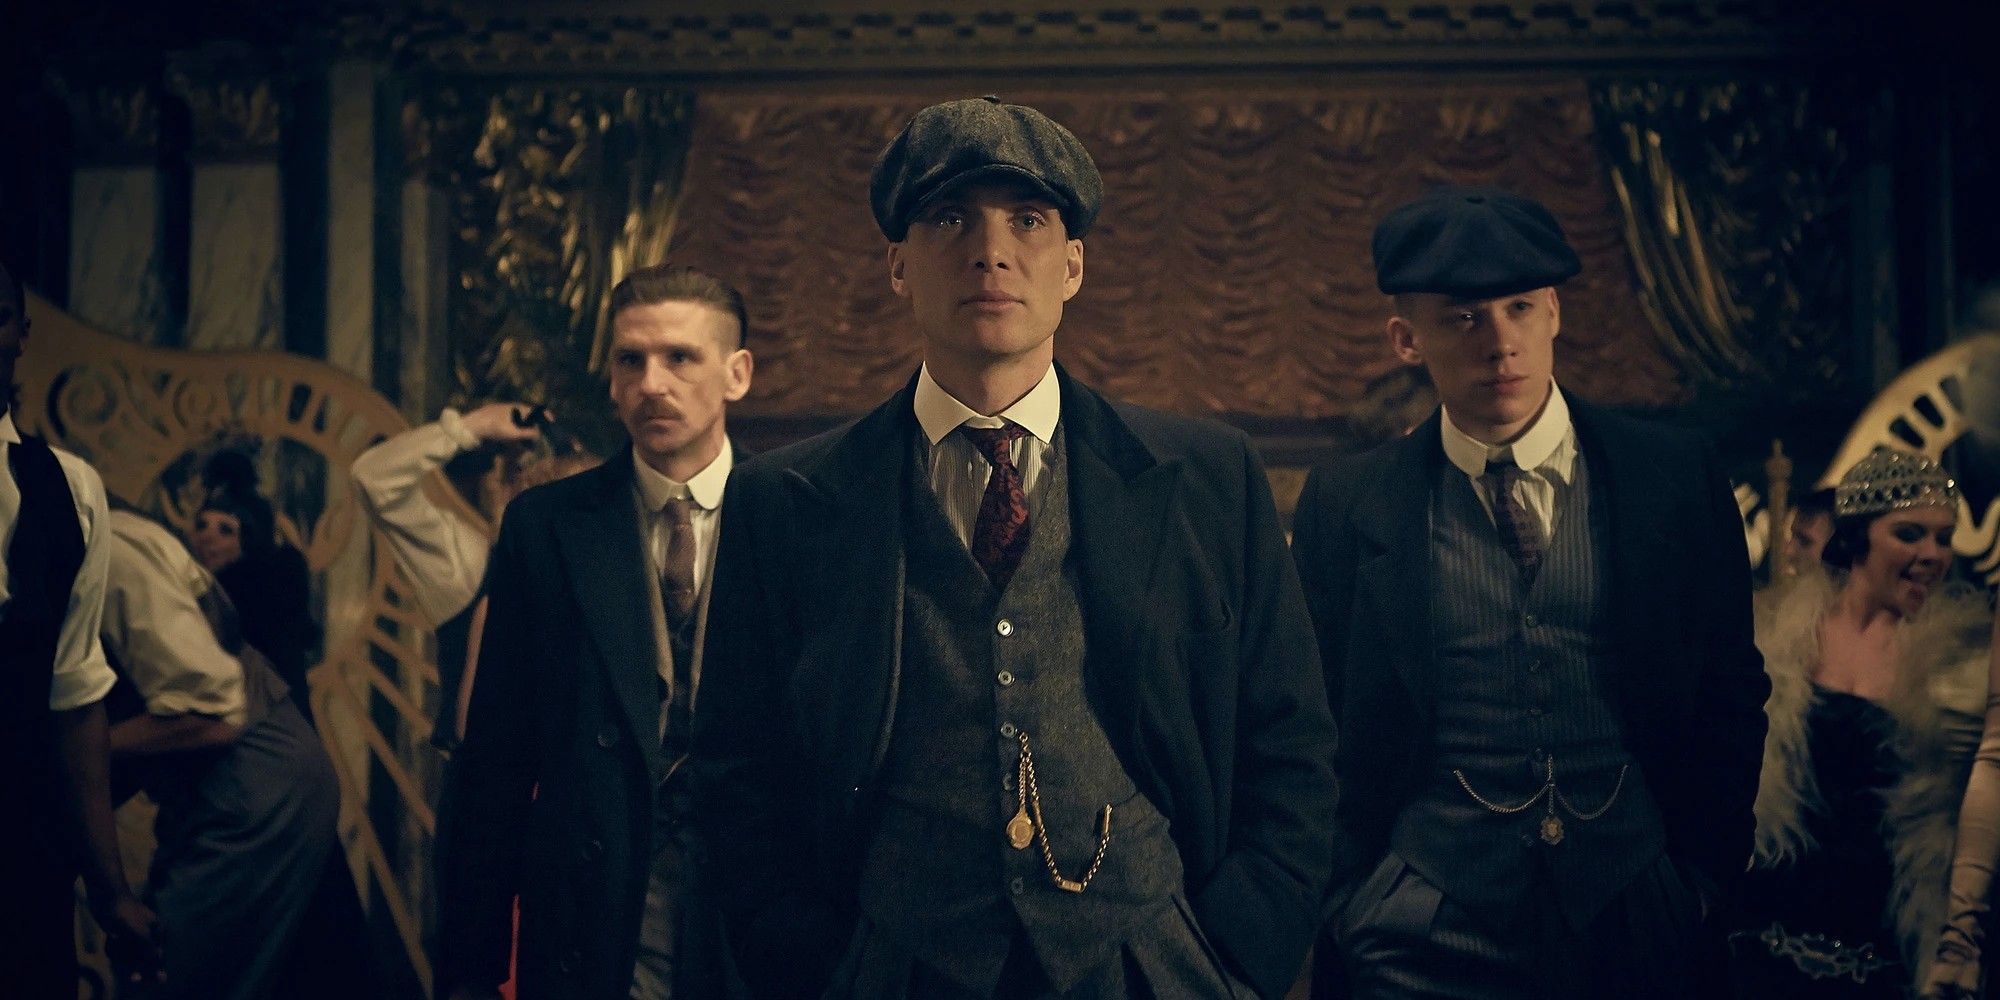 Paul Anderson, Cillian Murphy and Joe Cole walking into a party in Peaky Blinders.